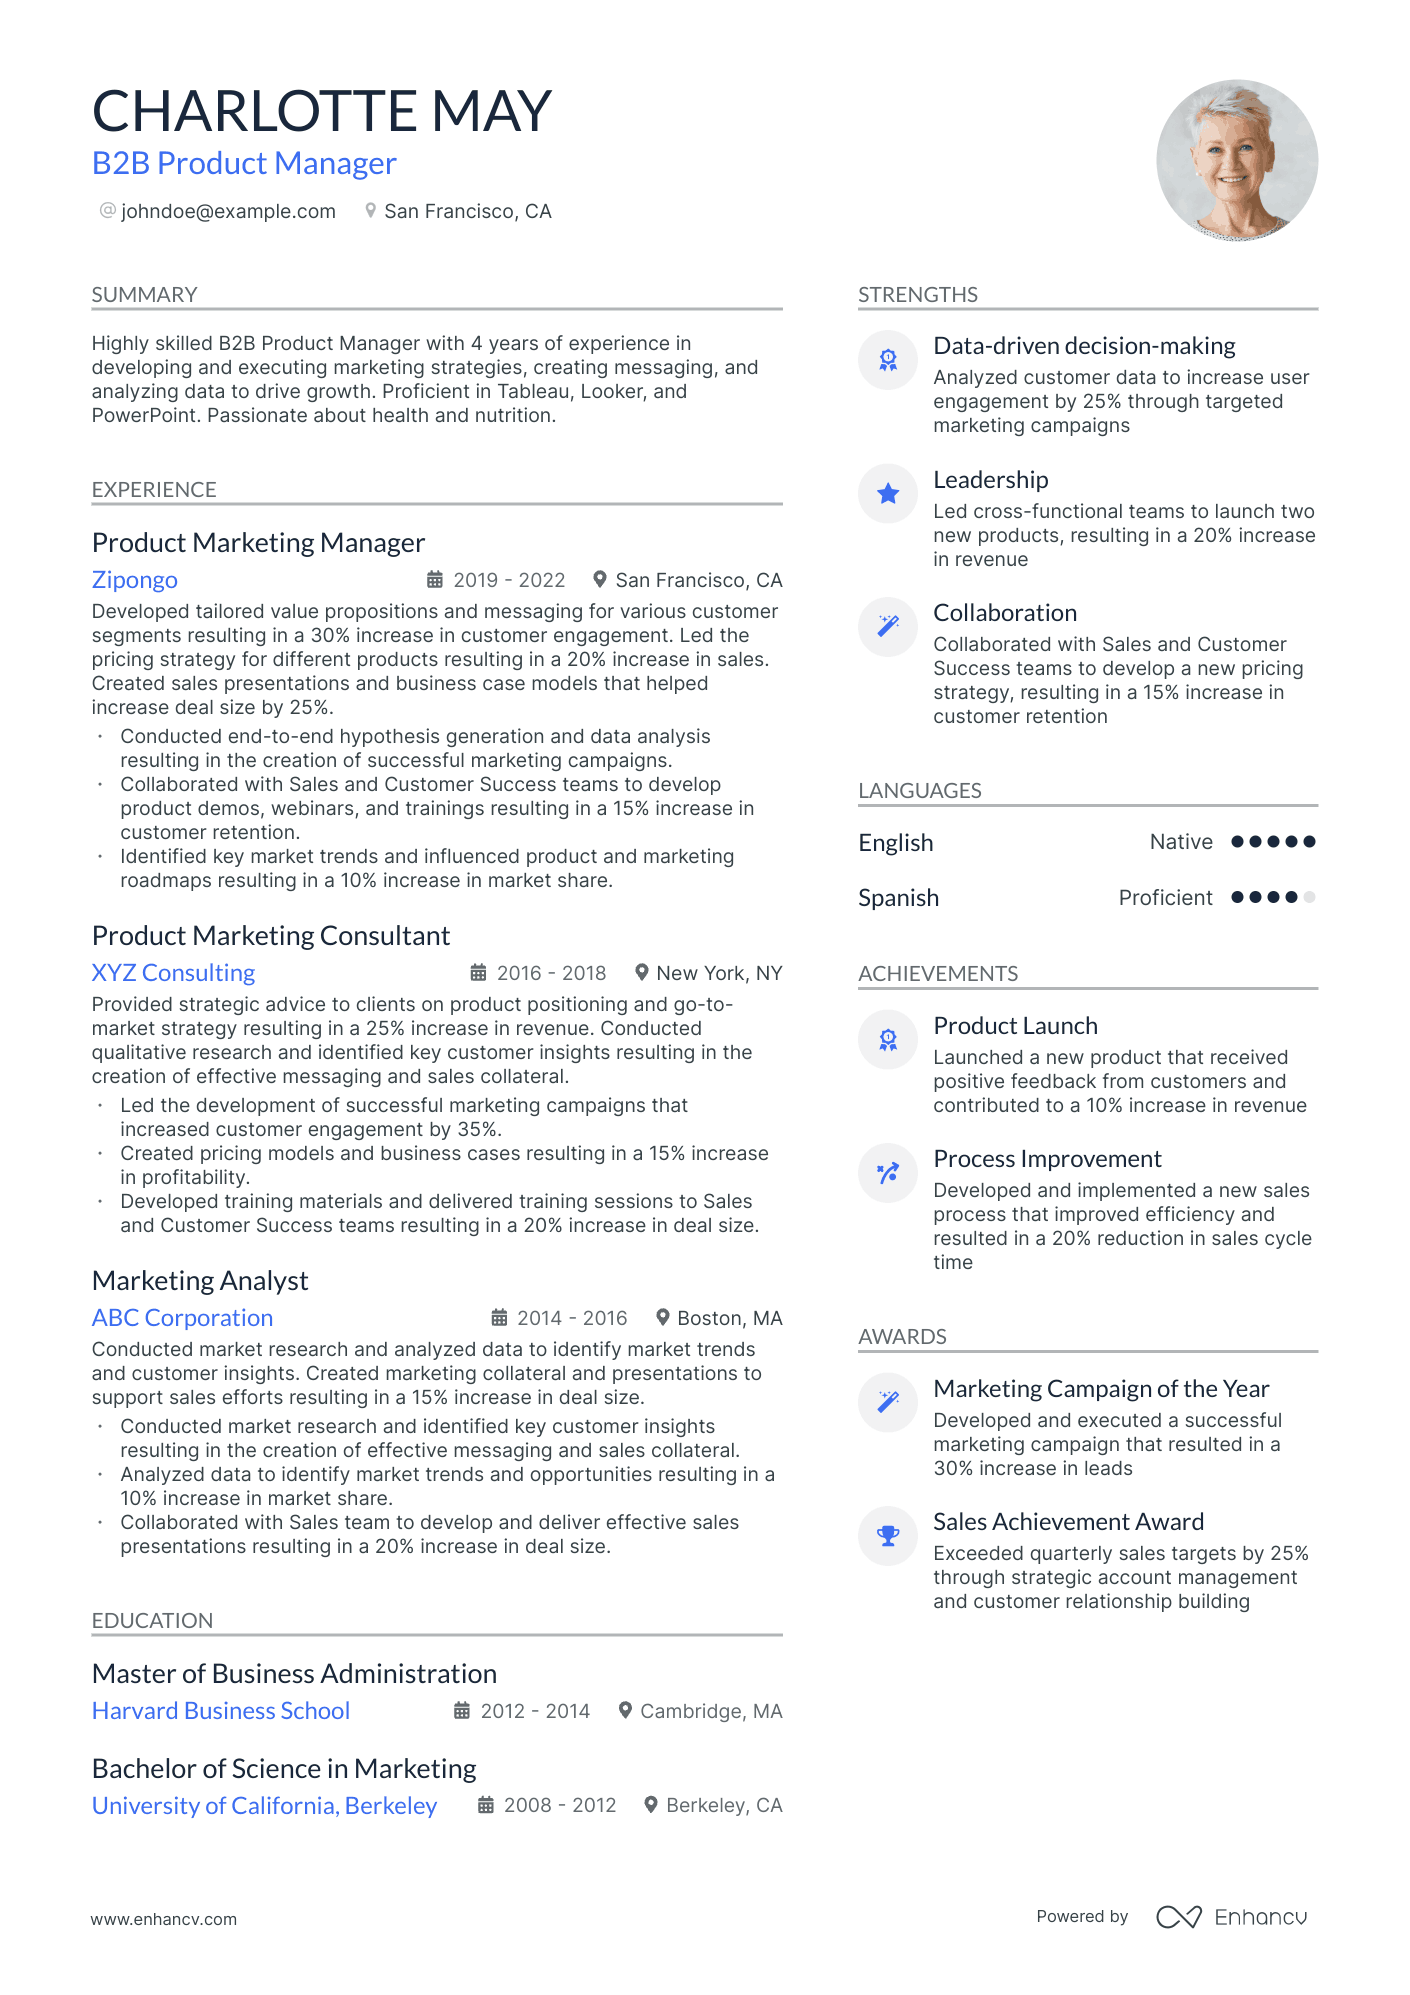 B2B Product Manager resume example